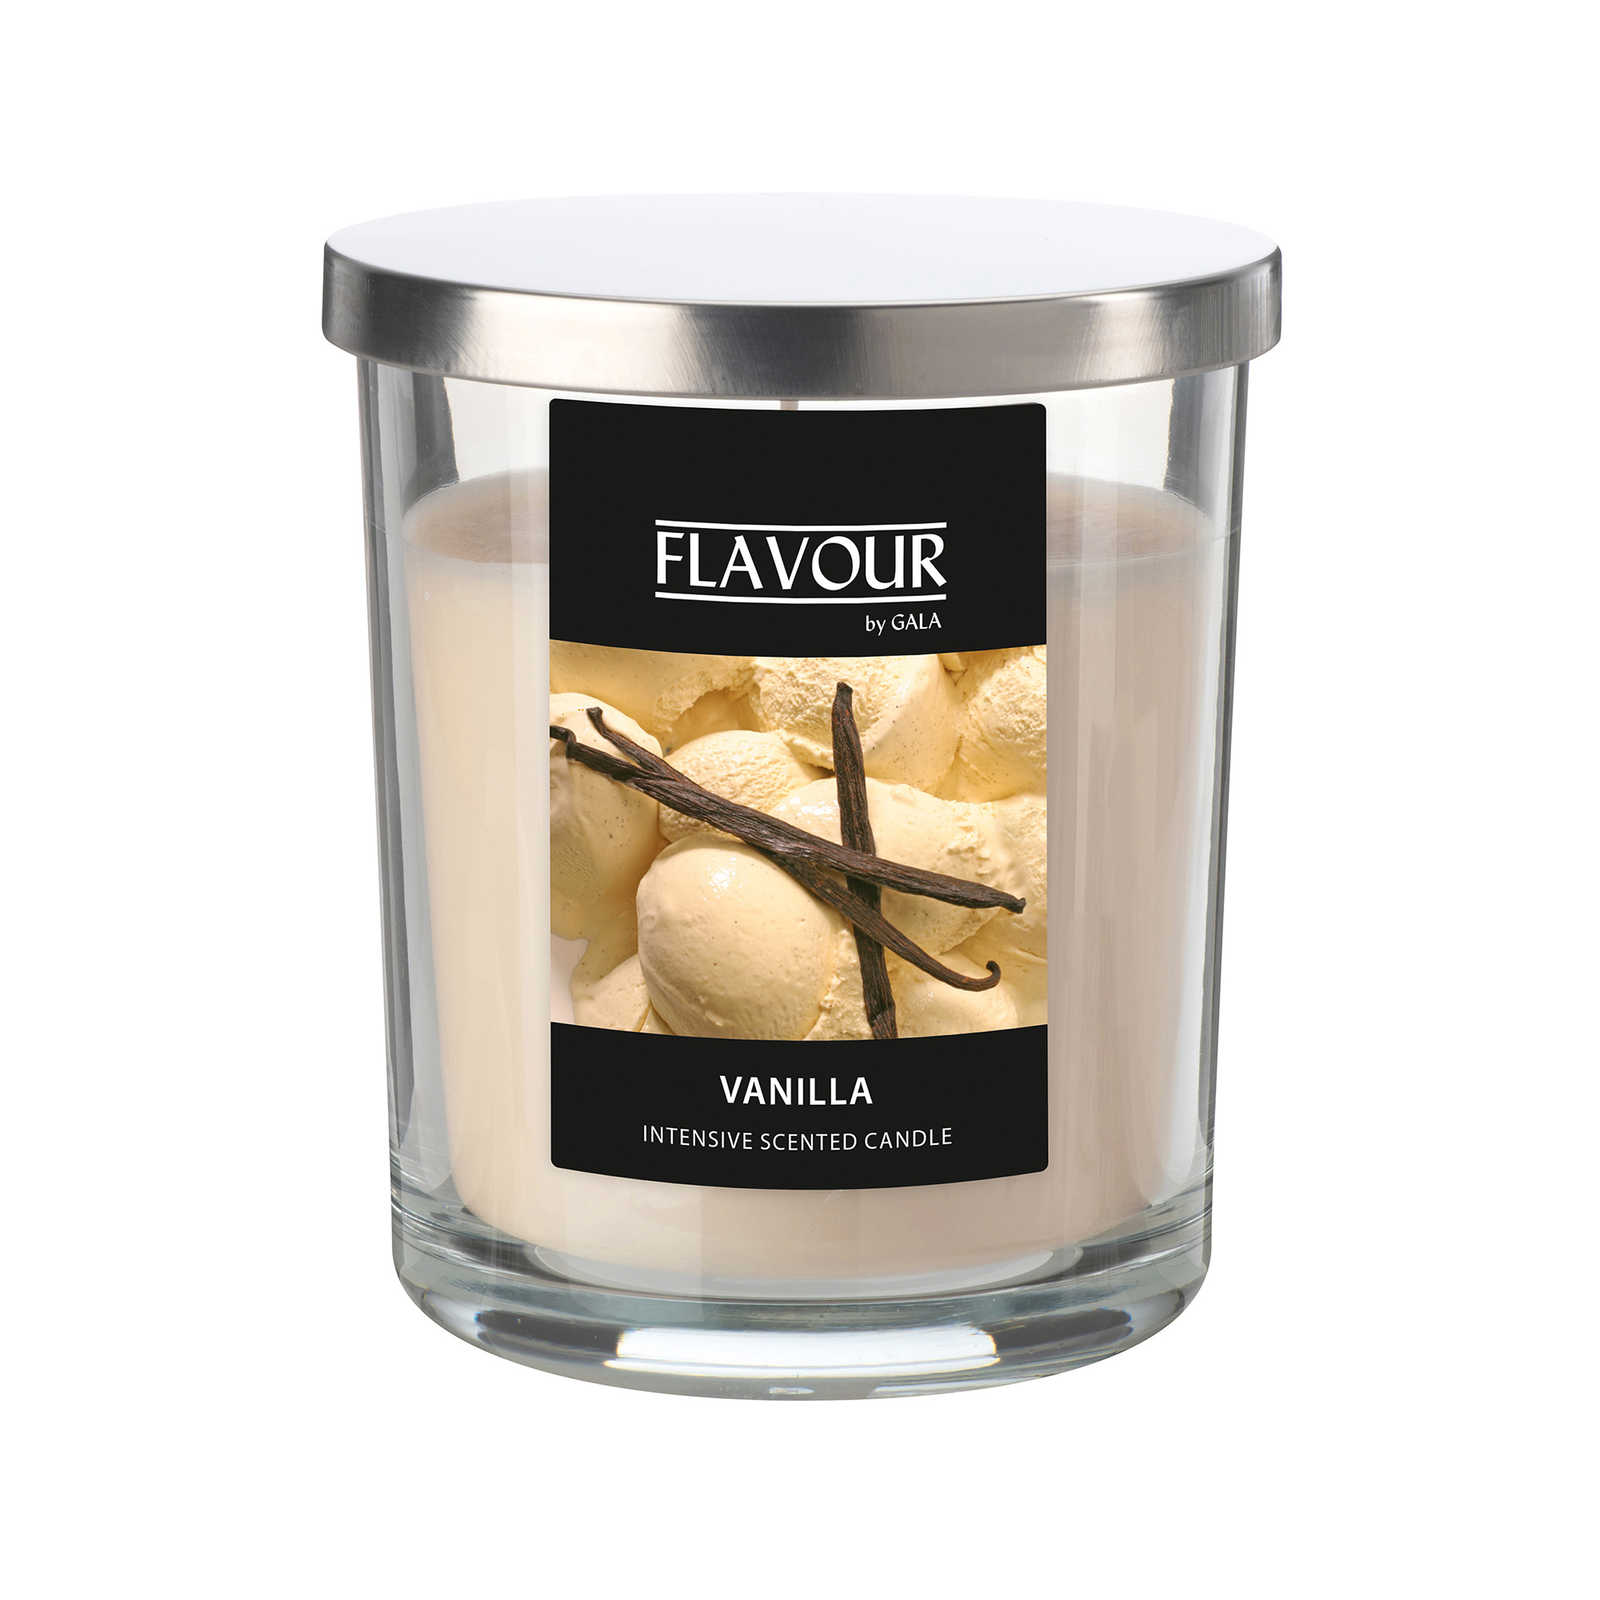         Vanilla scented candle with creamy vanilla scent - 380g
    